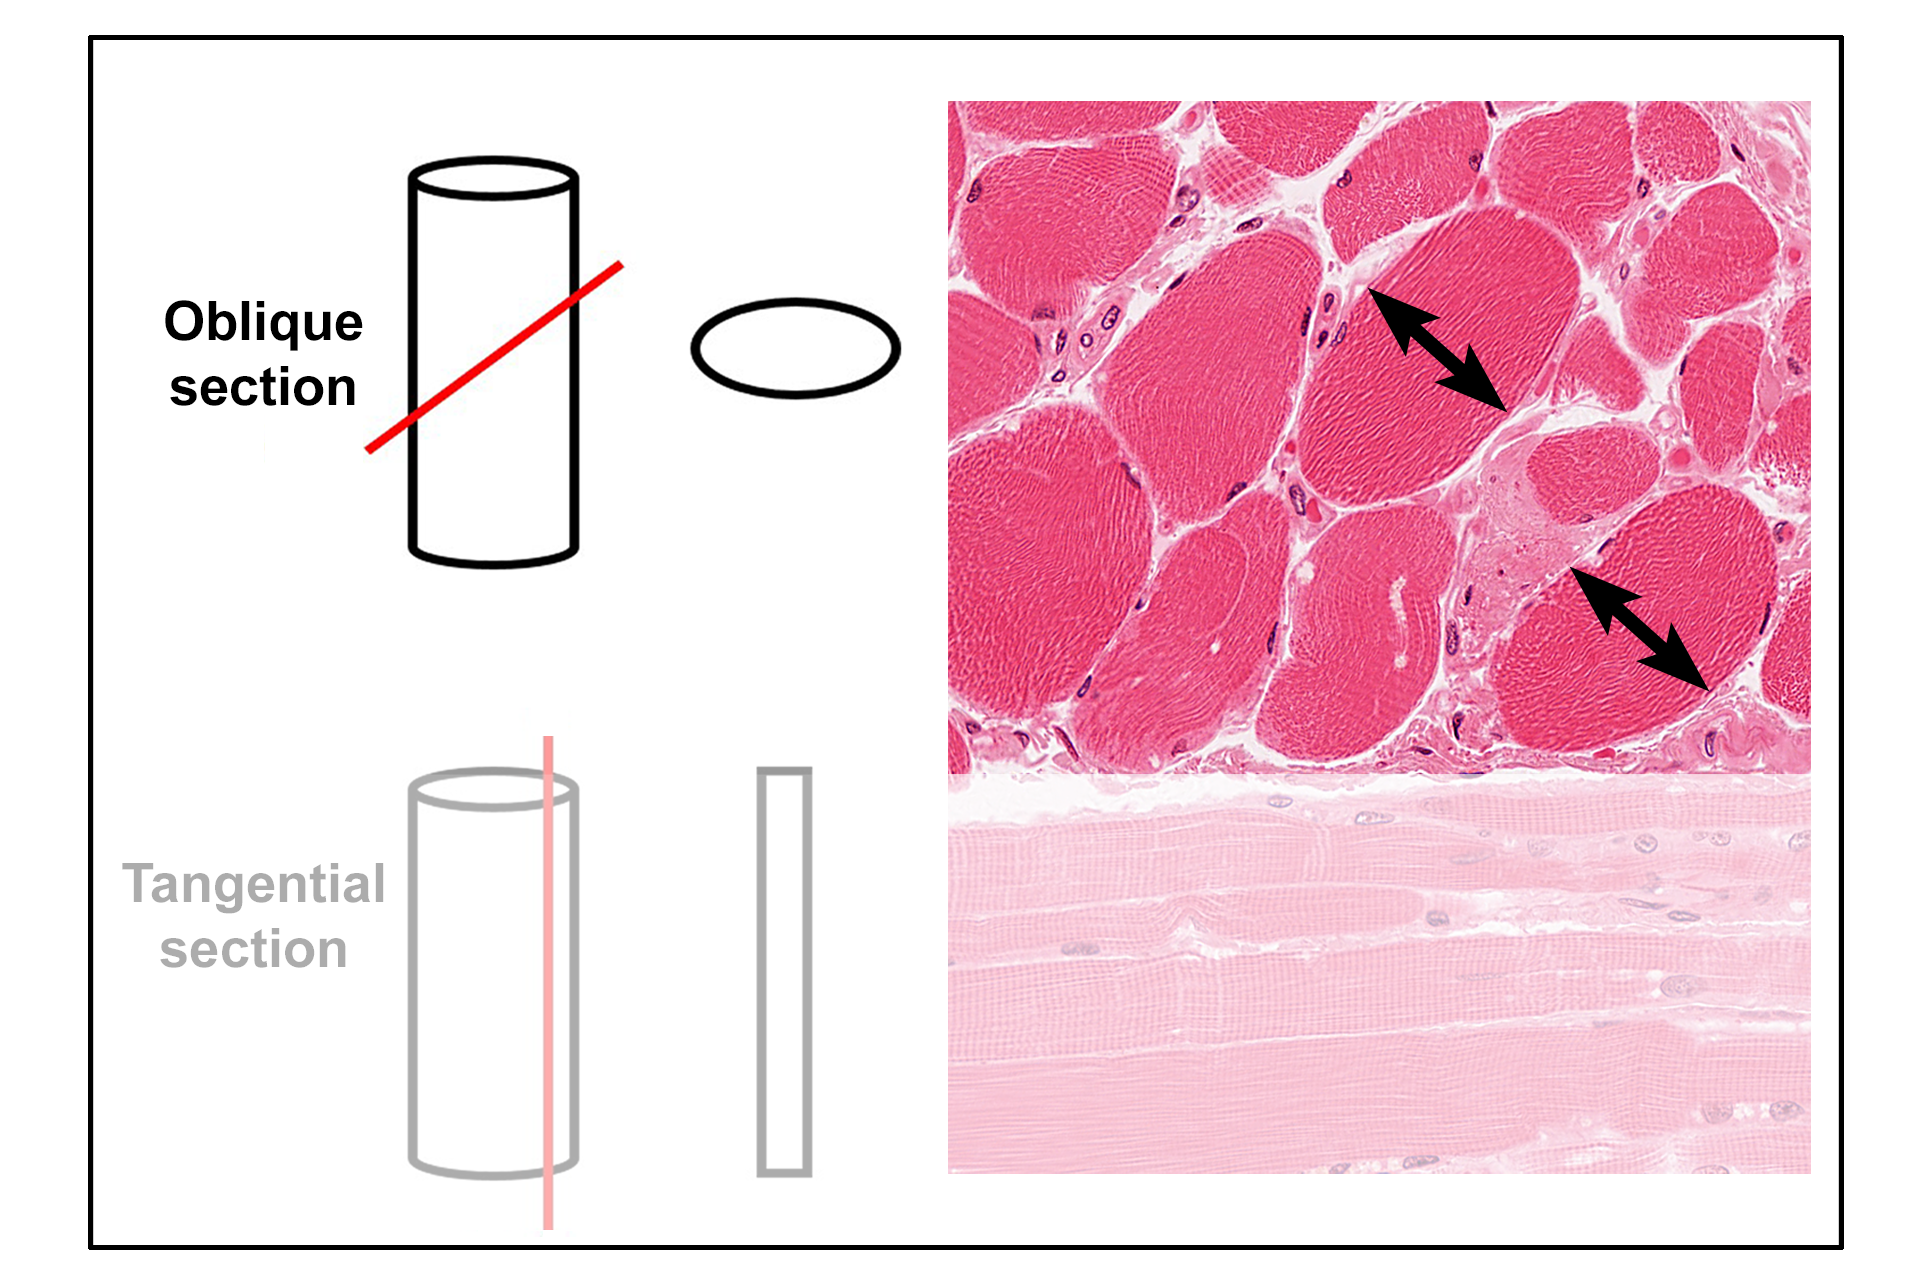  - Oblique section >  <p>An oblique section is a slice through a structure in a plane that is other than parallel or perpendicular to the longest axis of the structure.  In this example, a cylindrical structure will appear oval in section.  Examples of obliquely-sectioned skeletal muscle fibers are indicated.  </p>
